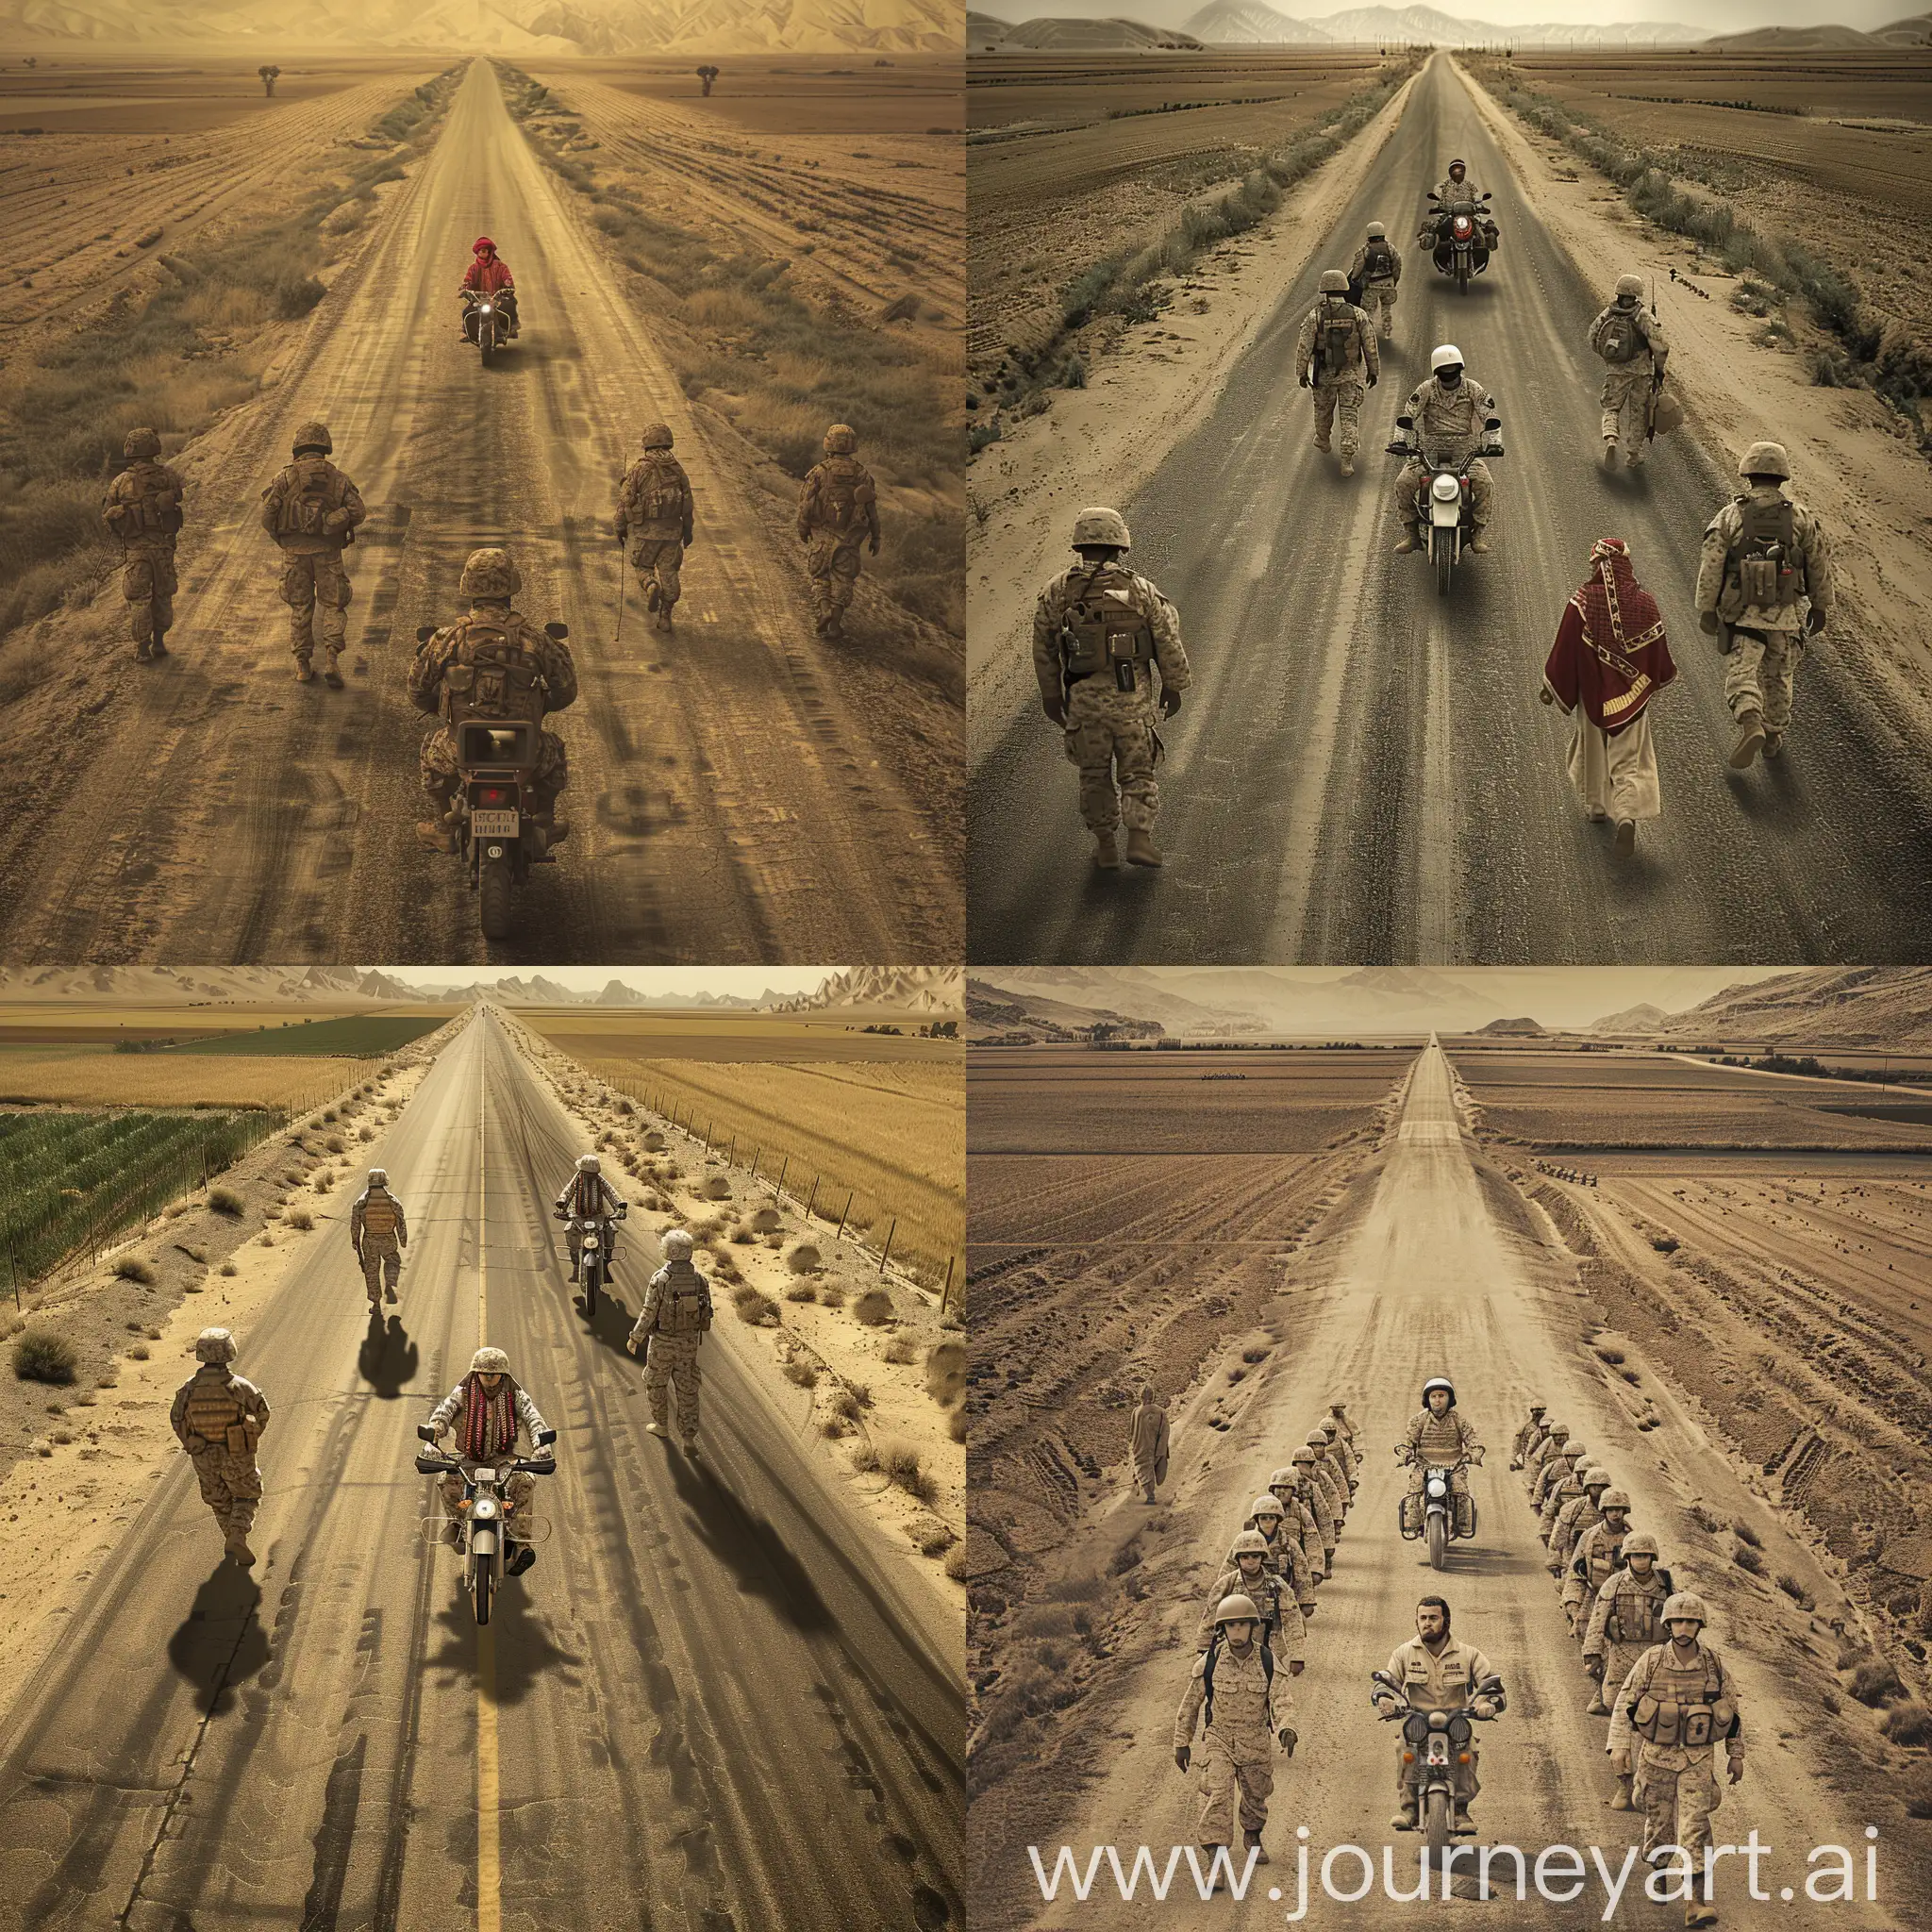 a photorealistic image depicting footage from a old camcorder showing a group of Marines patrolling down a desert road in Afghanistan. There are fields to either side. Maybe a motorcyclist dressed in traditional Aghani clothing driving down the middle while the Marines walk on either side of the road.